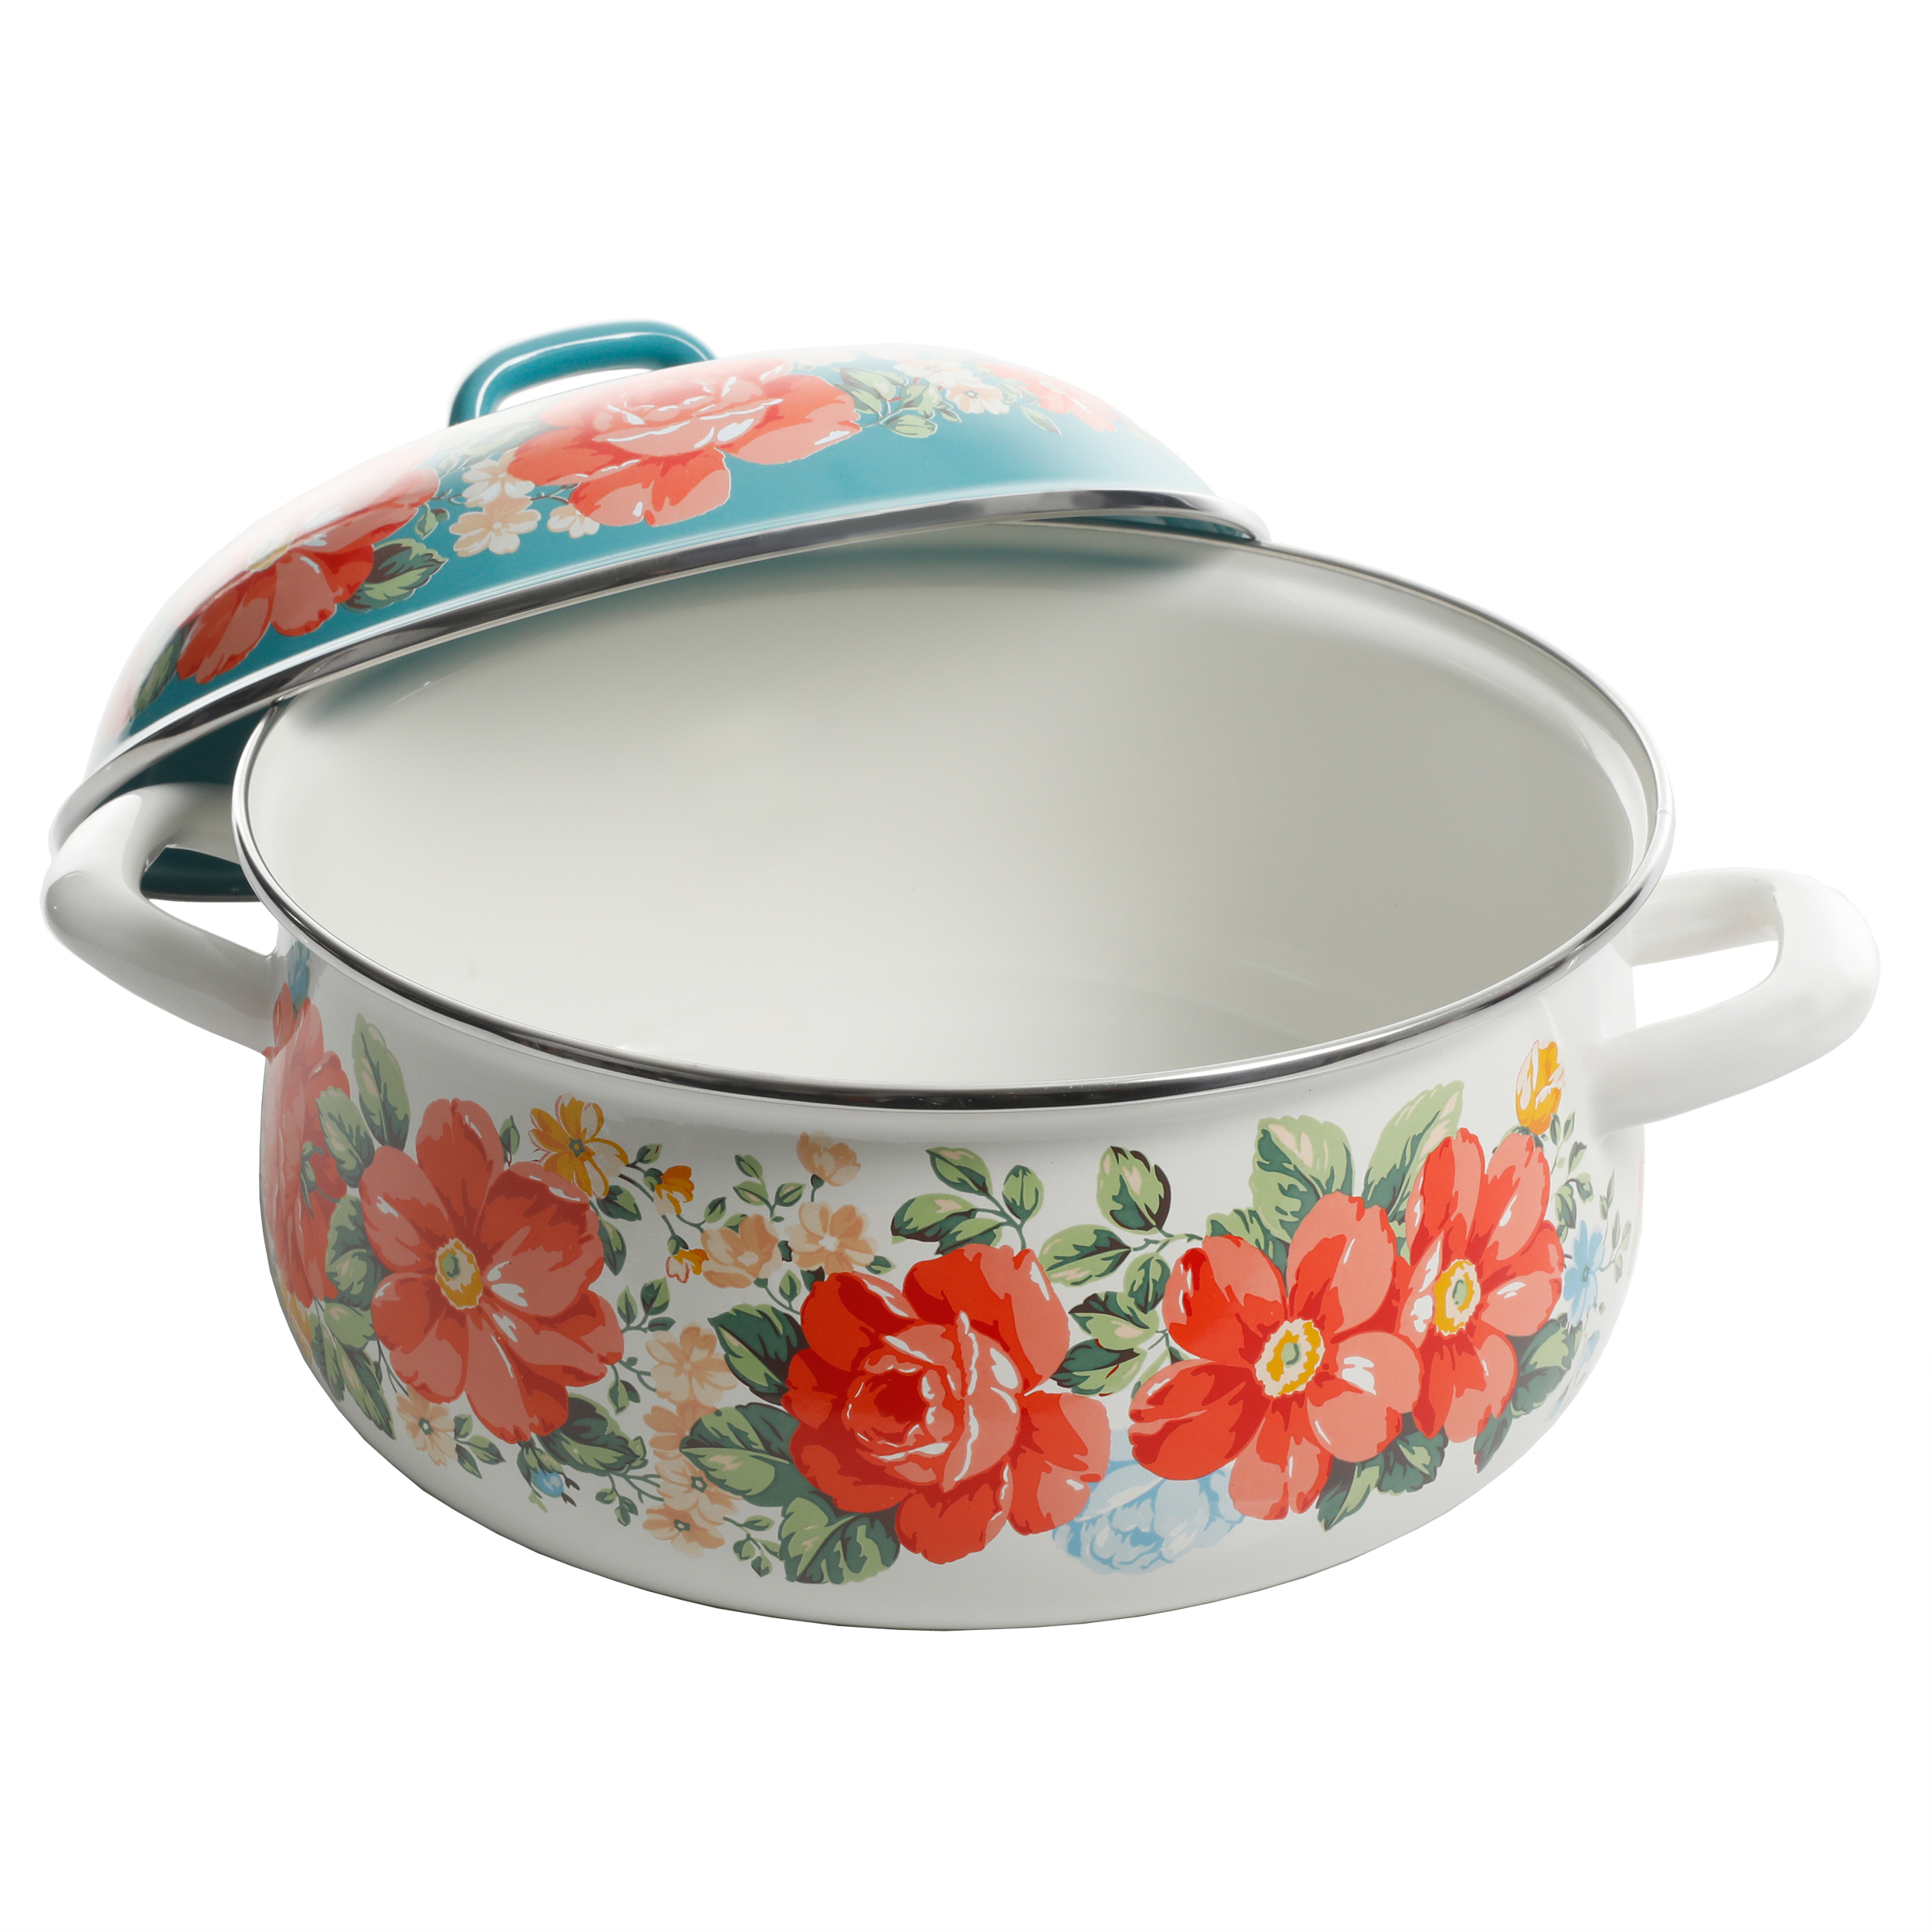 The Pioneer Woman Vintage Floral 4 Quart Enamel Cast Iron Dutch Oven with Lid - image 4 of 4